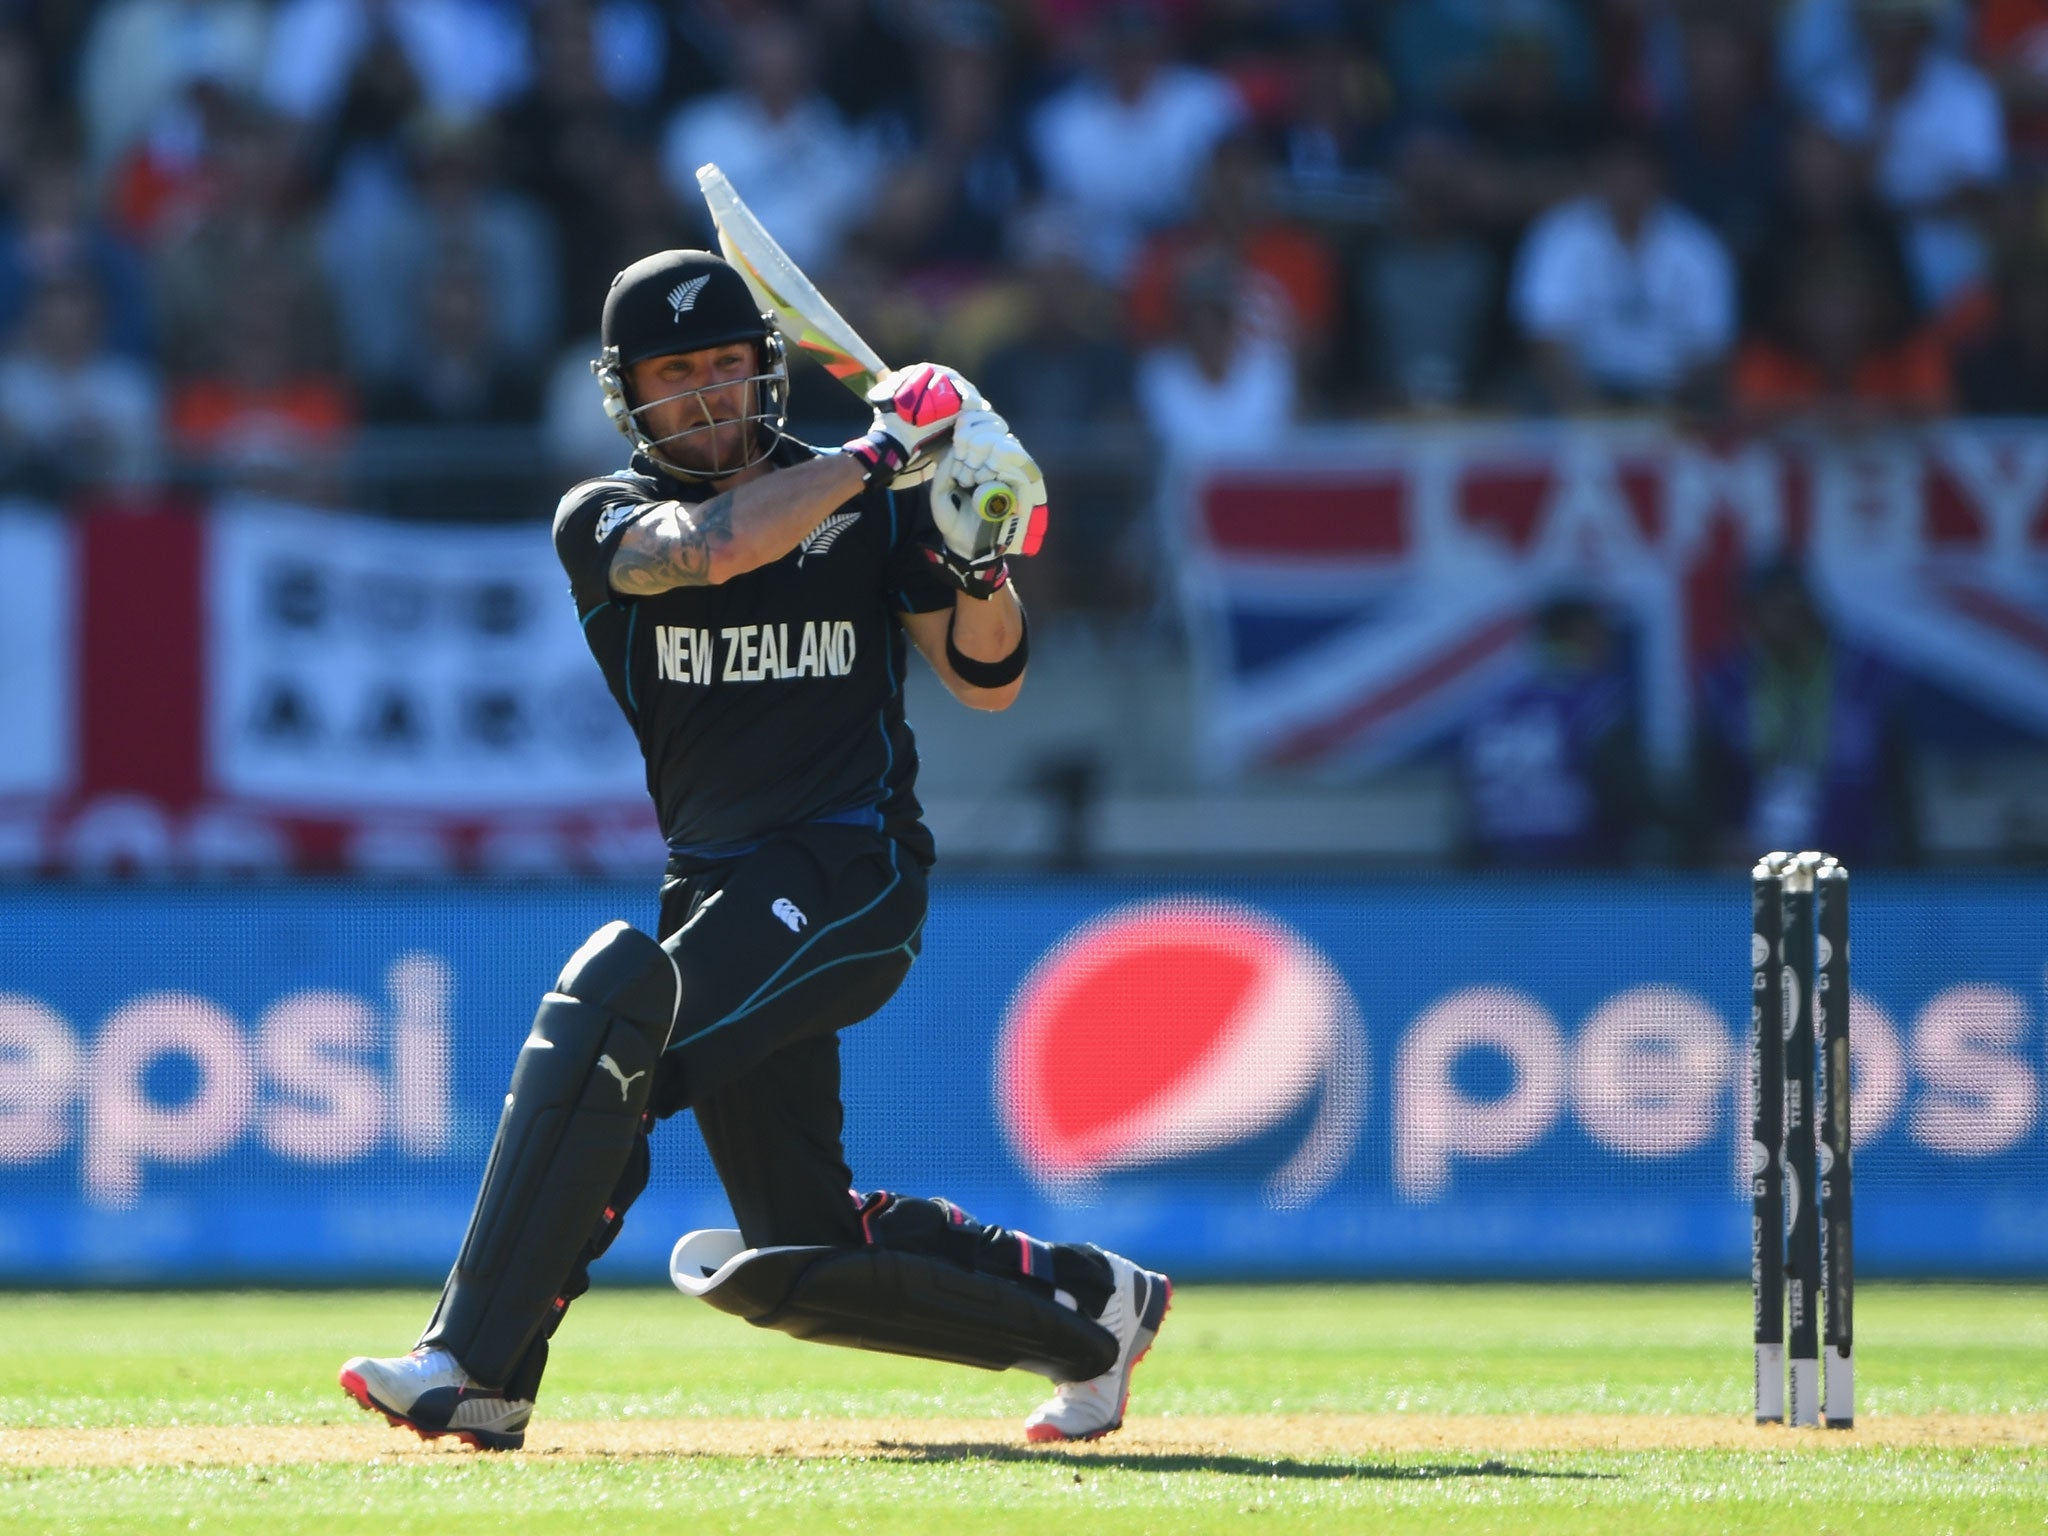 McCullum makes the cut as captain, but how many of his teammates join him?